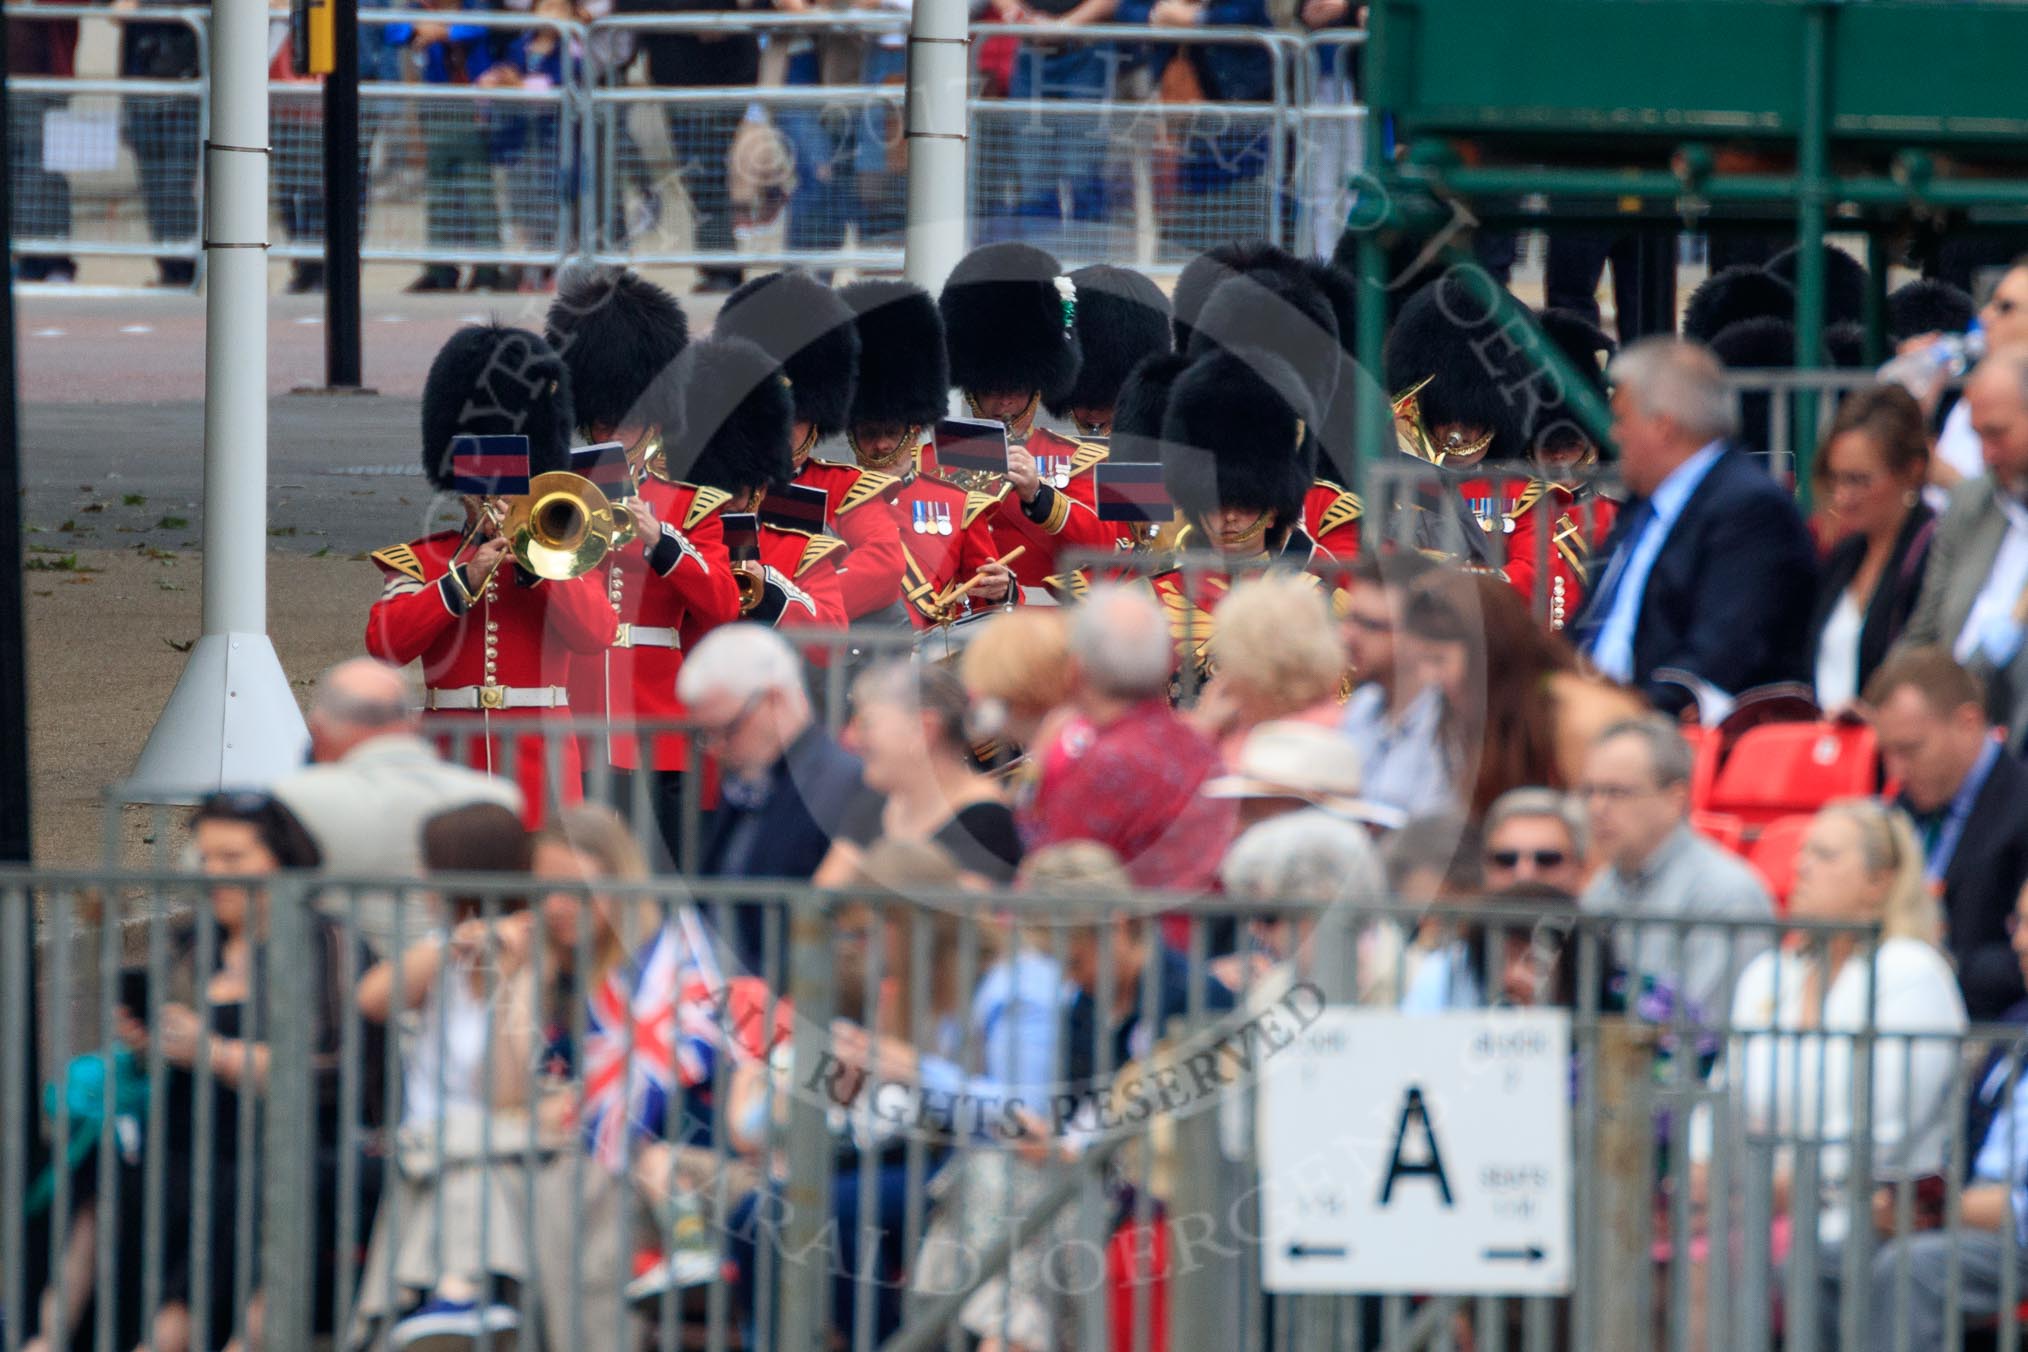 The Band of the Welsh Guards in the background, marching from The Mall to Horse Guards Parade during The Colonel's Review 2018 (final rehearsal for Trooping the Colour, The Queen's Birthday Parade)  at Horse Guards Parade, Westminster, London, 2 June 2018, 10:11.